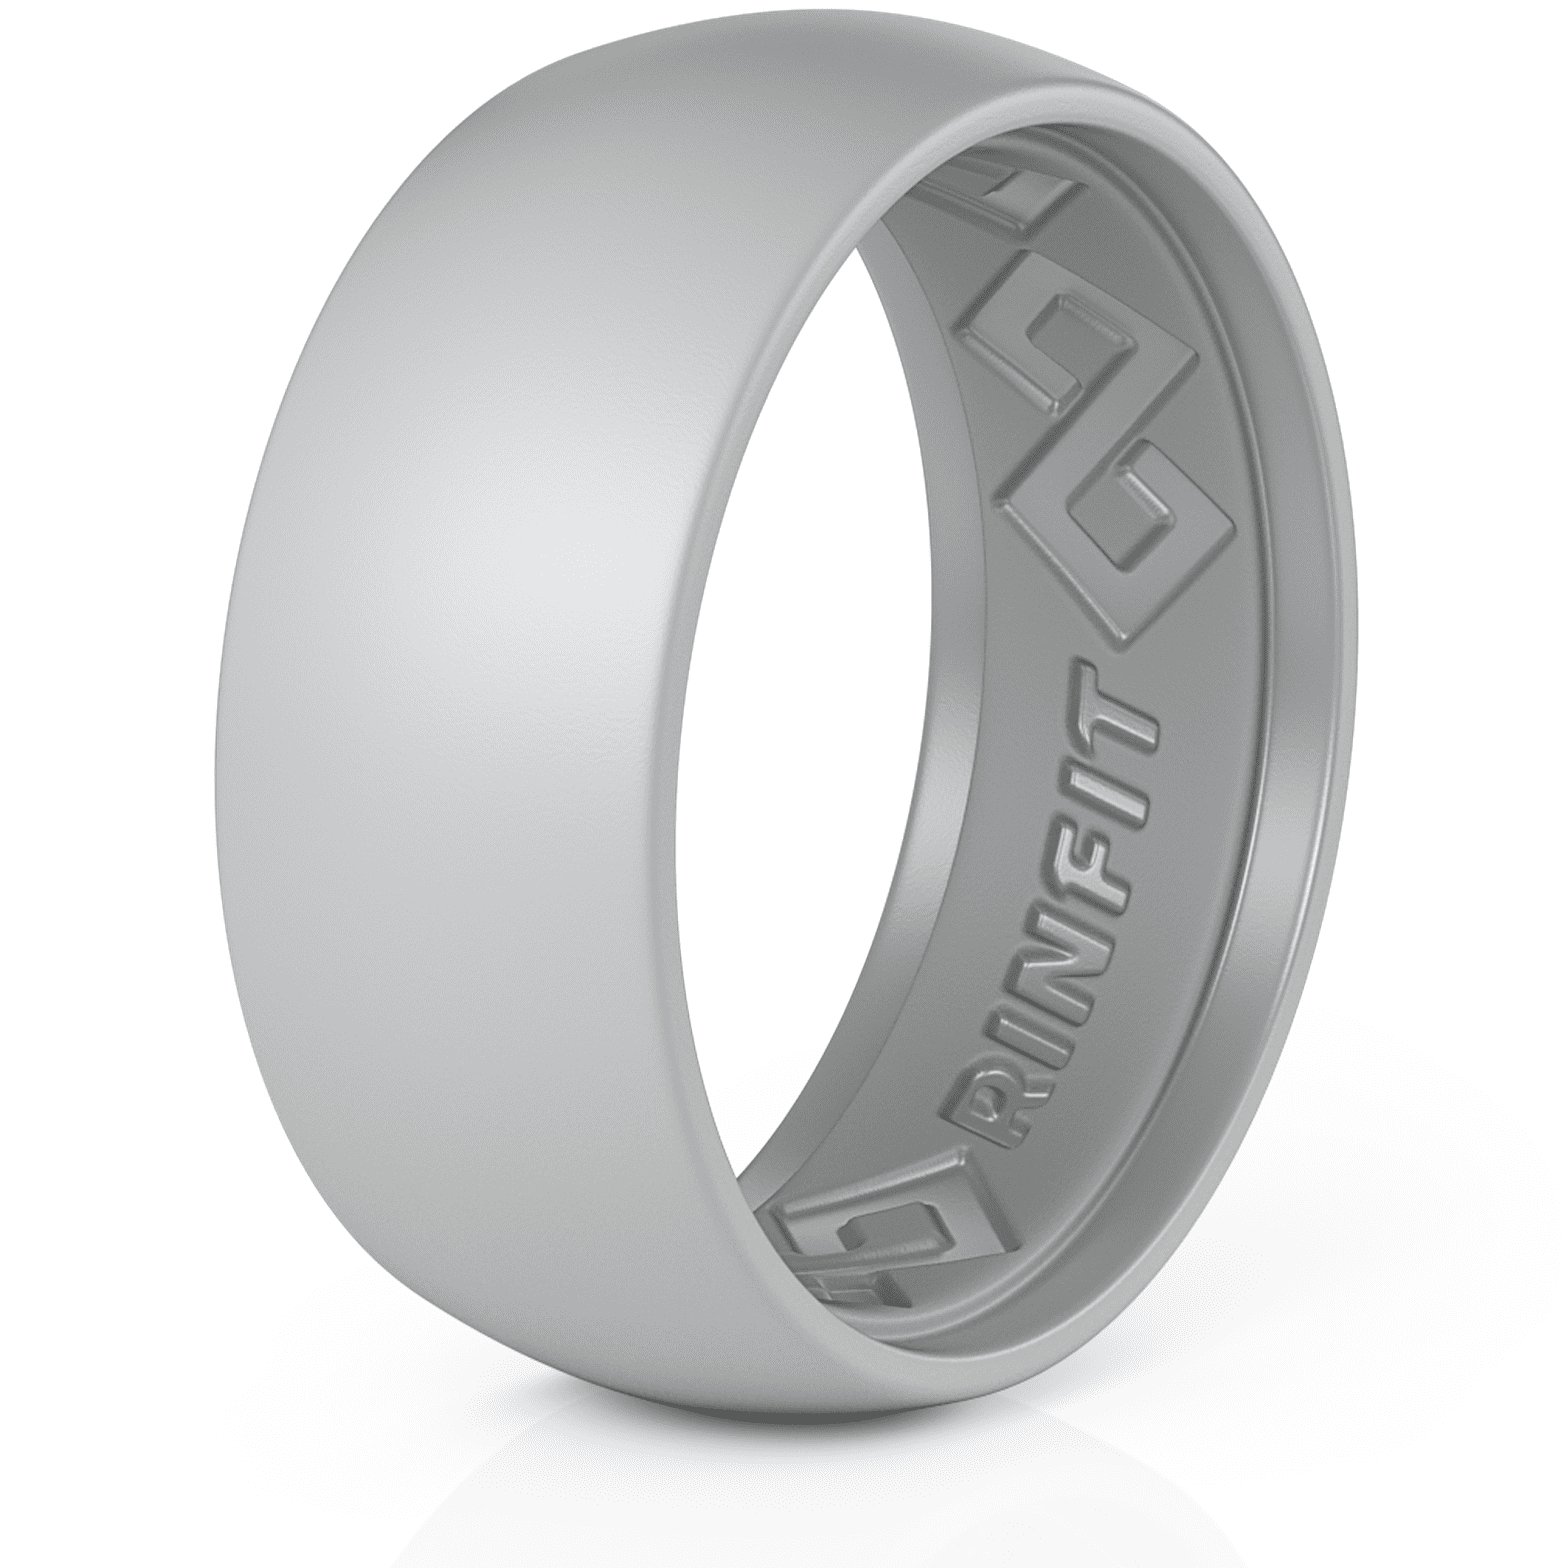 Black Silicone Wedding Rings for Men Band Perfect for CrossFit Fitness WODs 